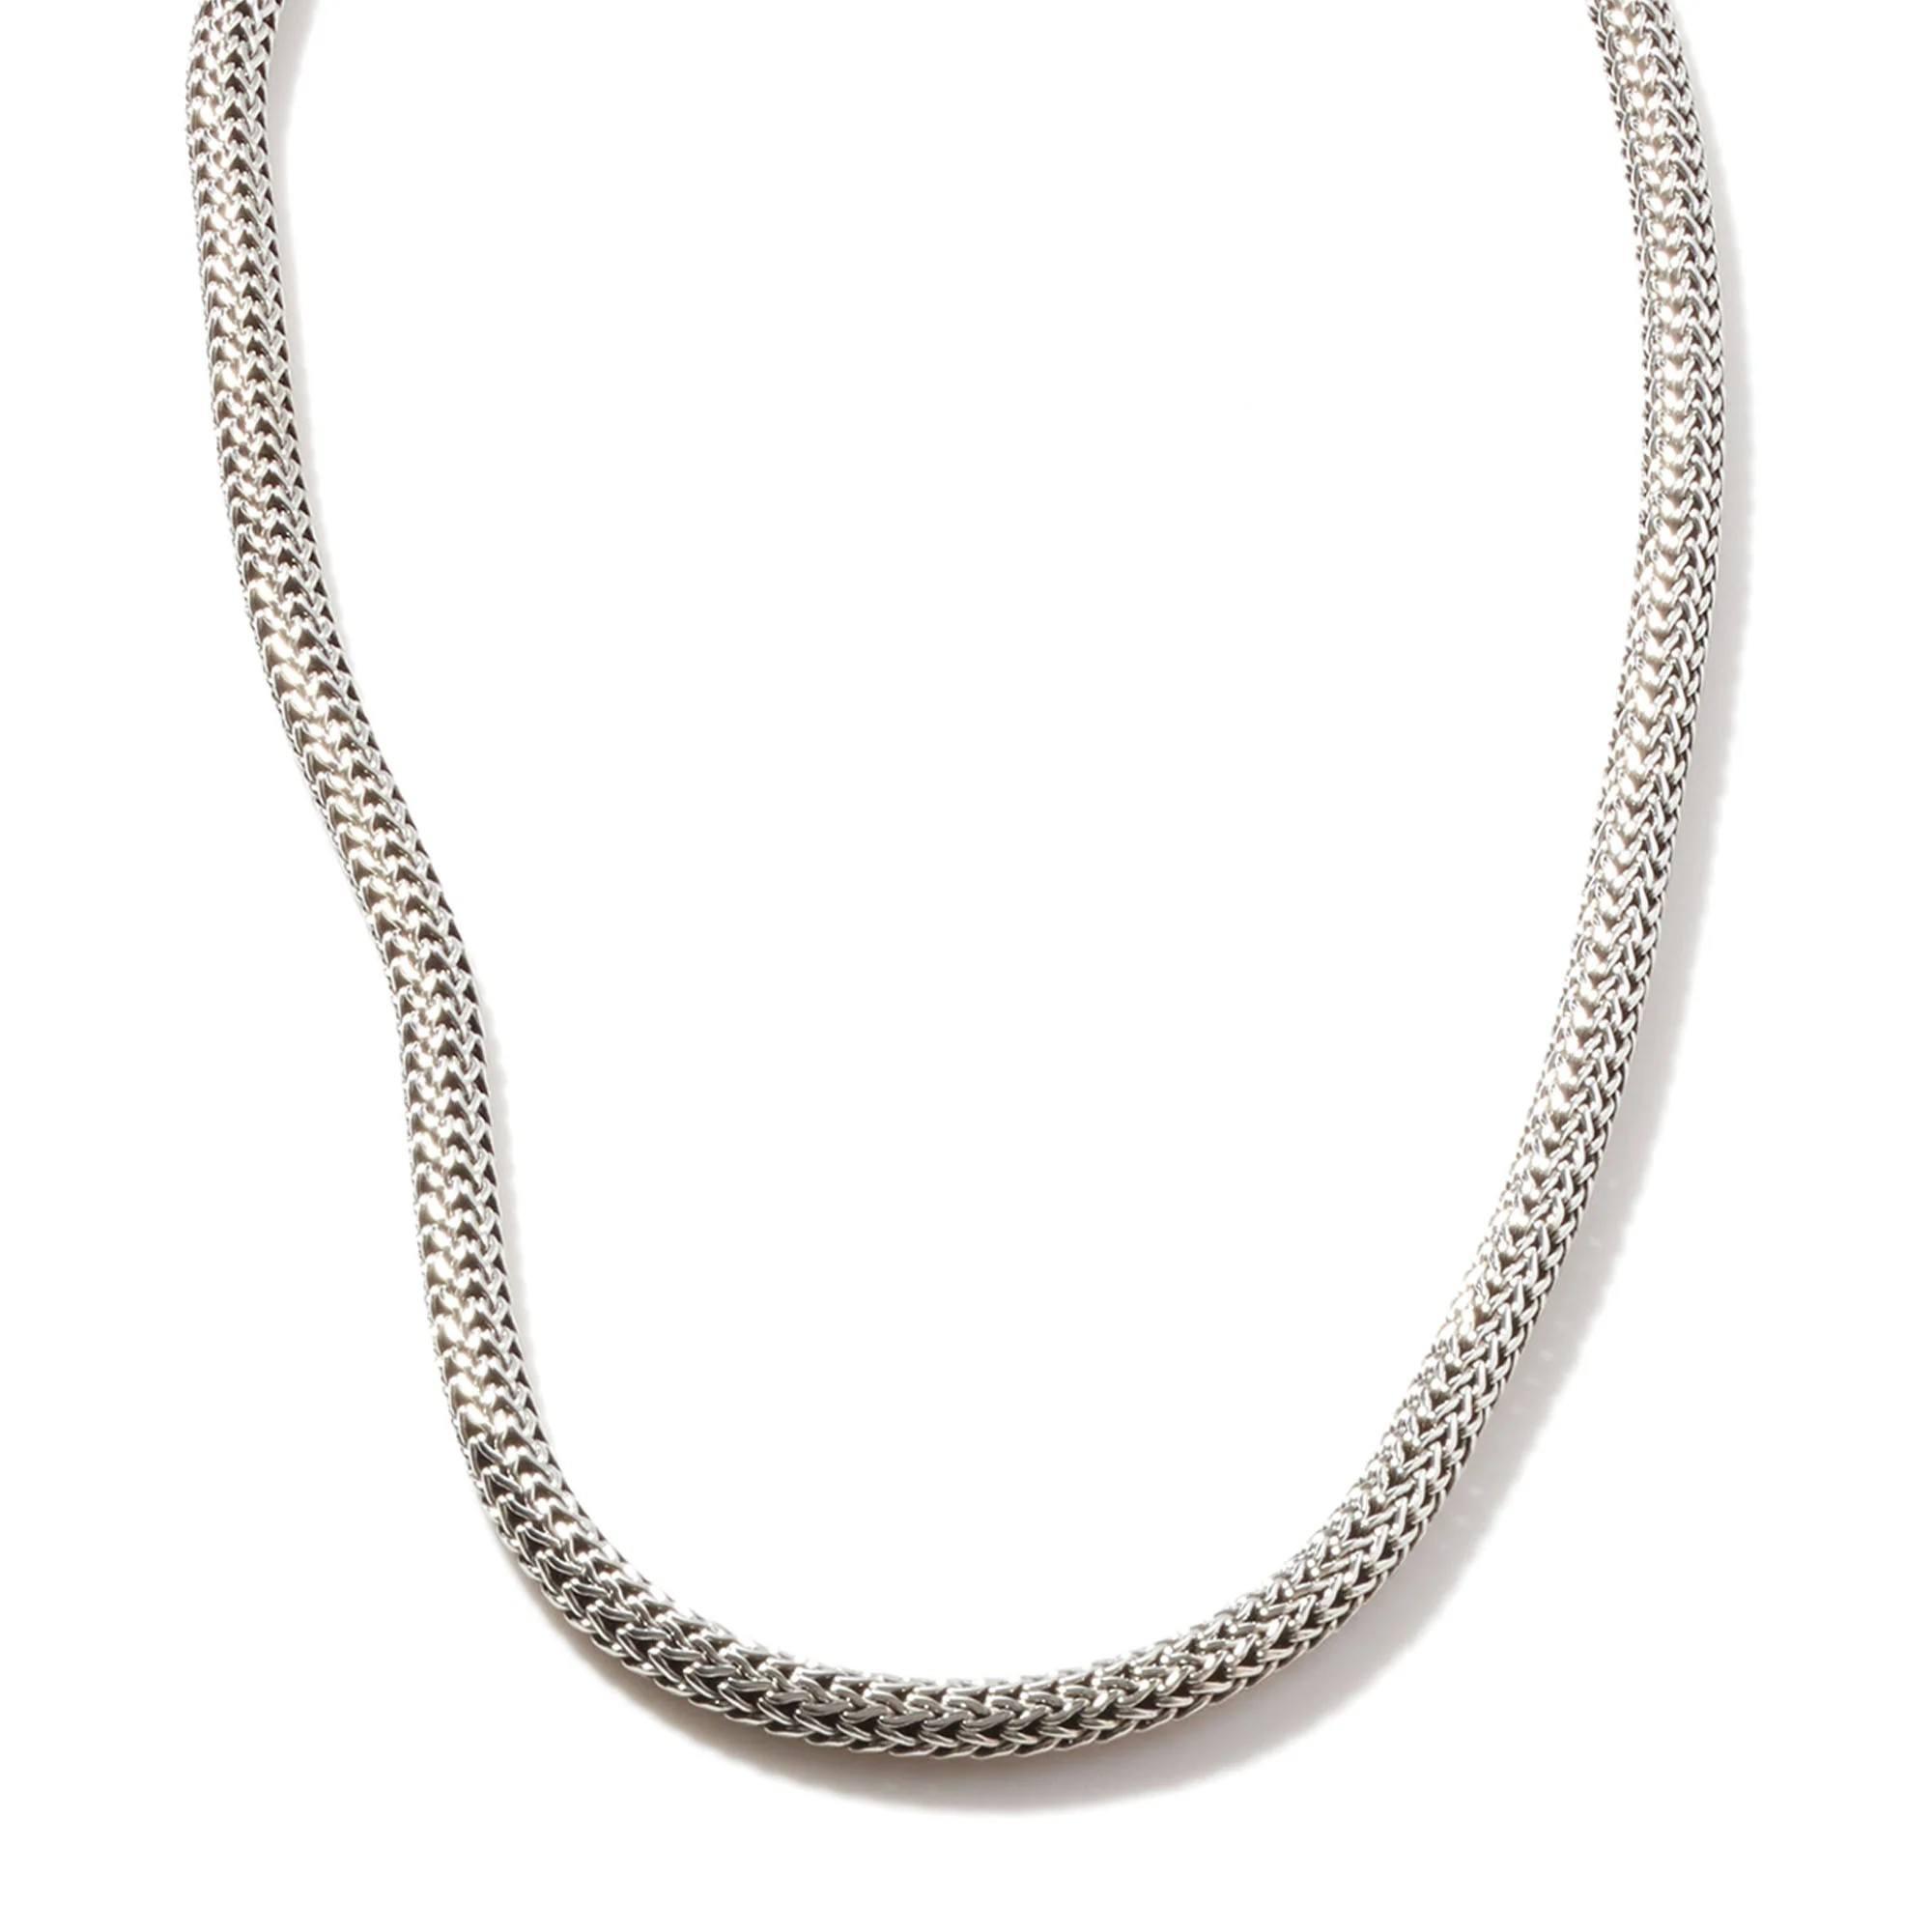 John Hardy Classic Chain 5MM Necklace in Silver 1